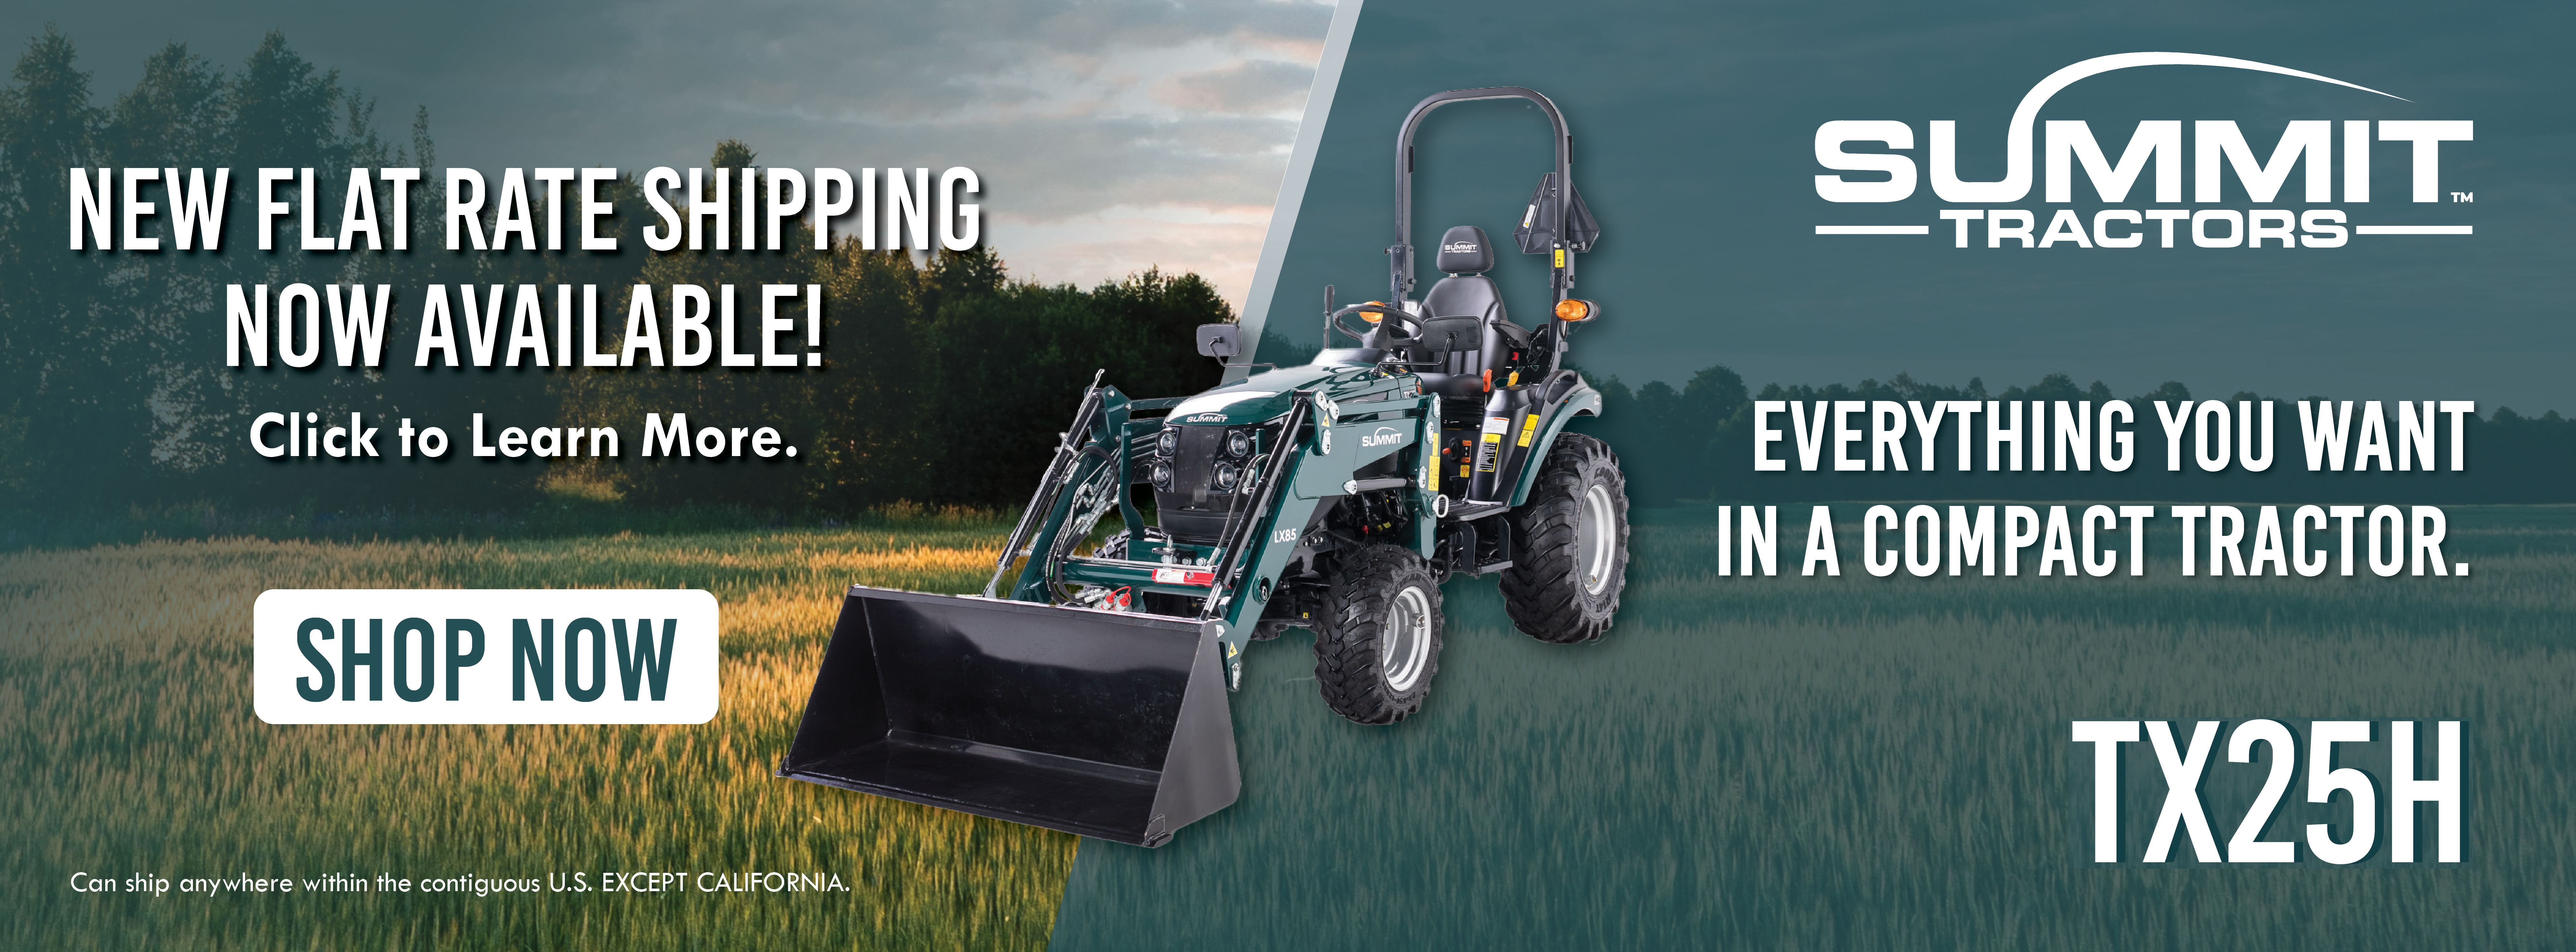 Summit Tractors Everything you want in a compact tractor